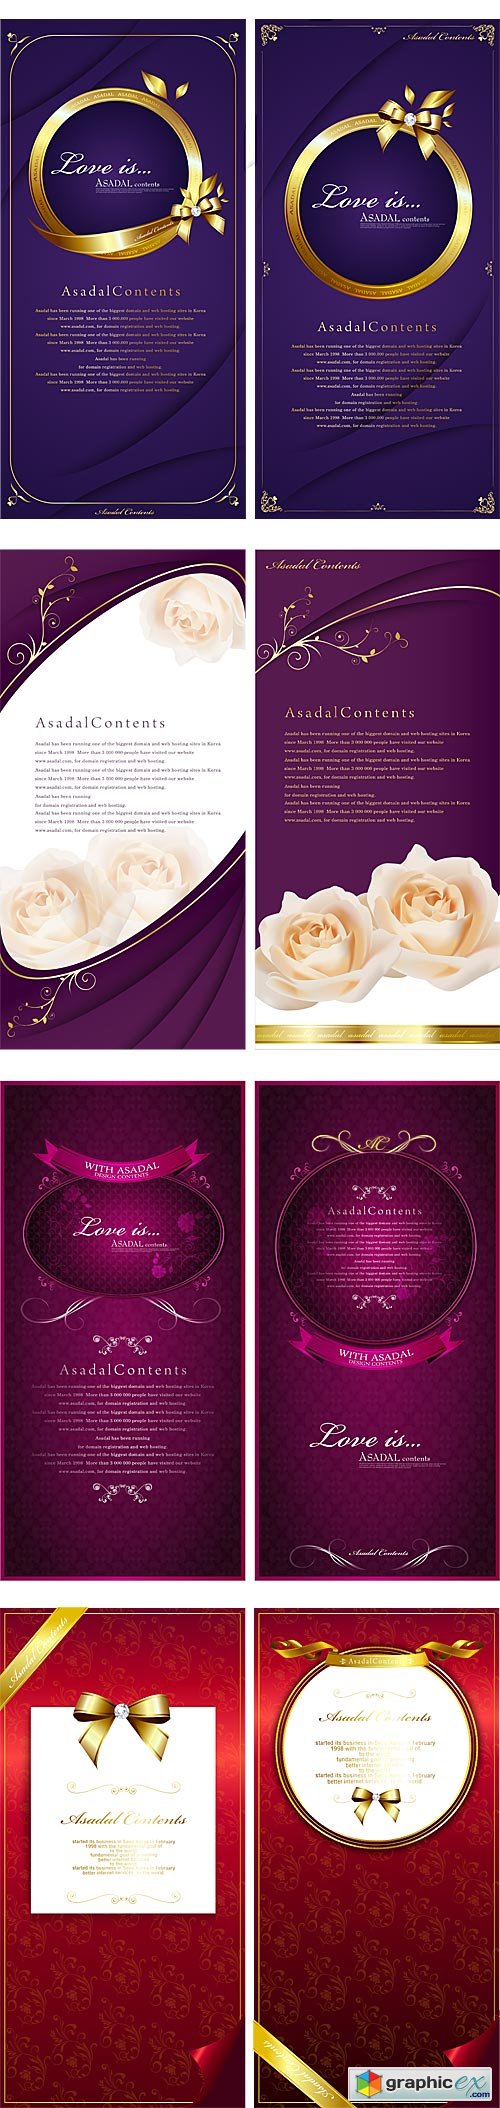 Brochures and cards design #3